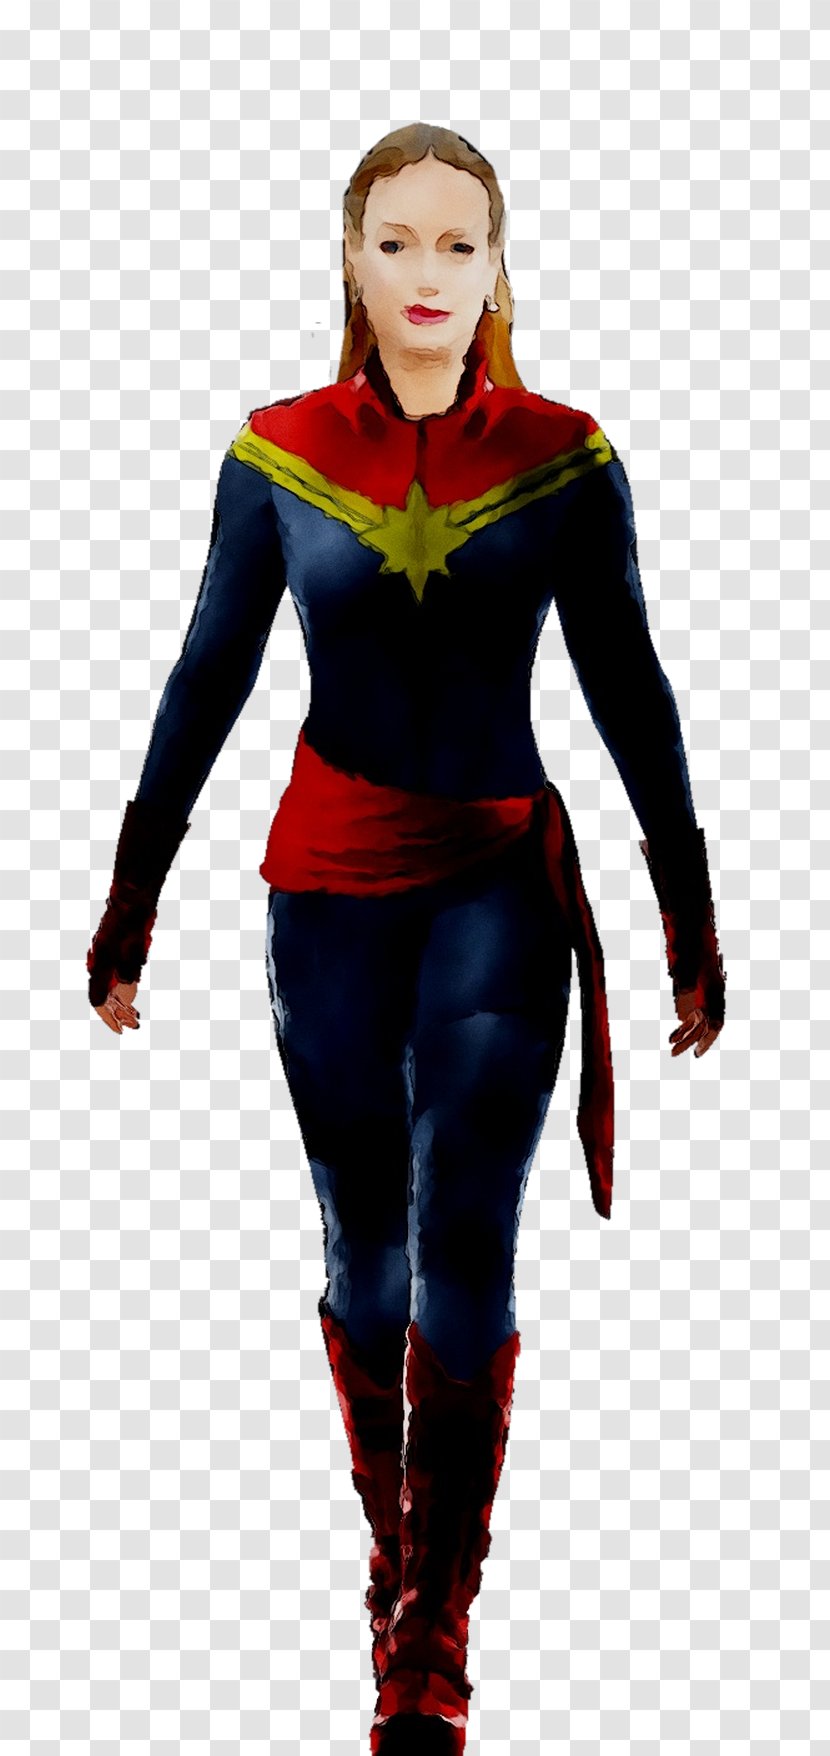 Costume Character Fiction - Clothing - Superhero Transparent PNG